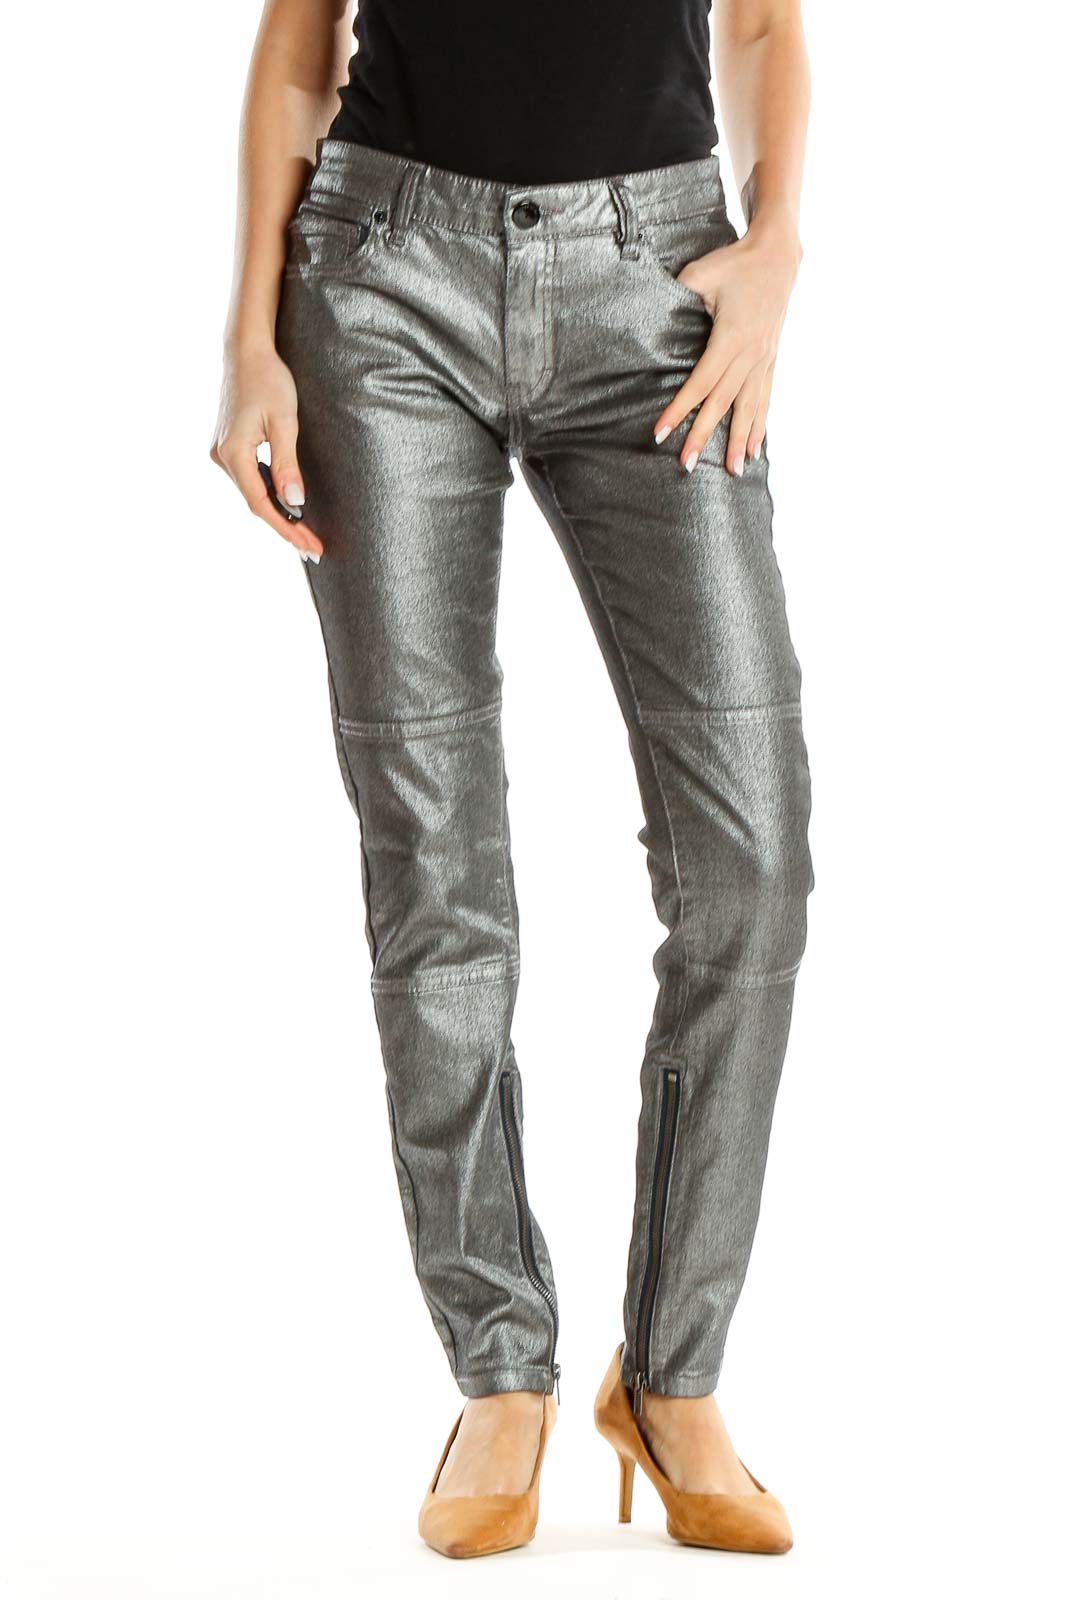 Silver  Metallic Shimmer Jeans Front